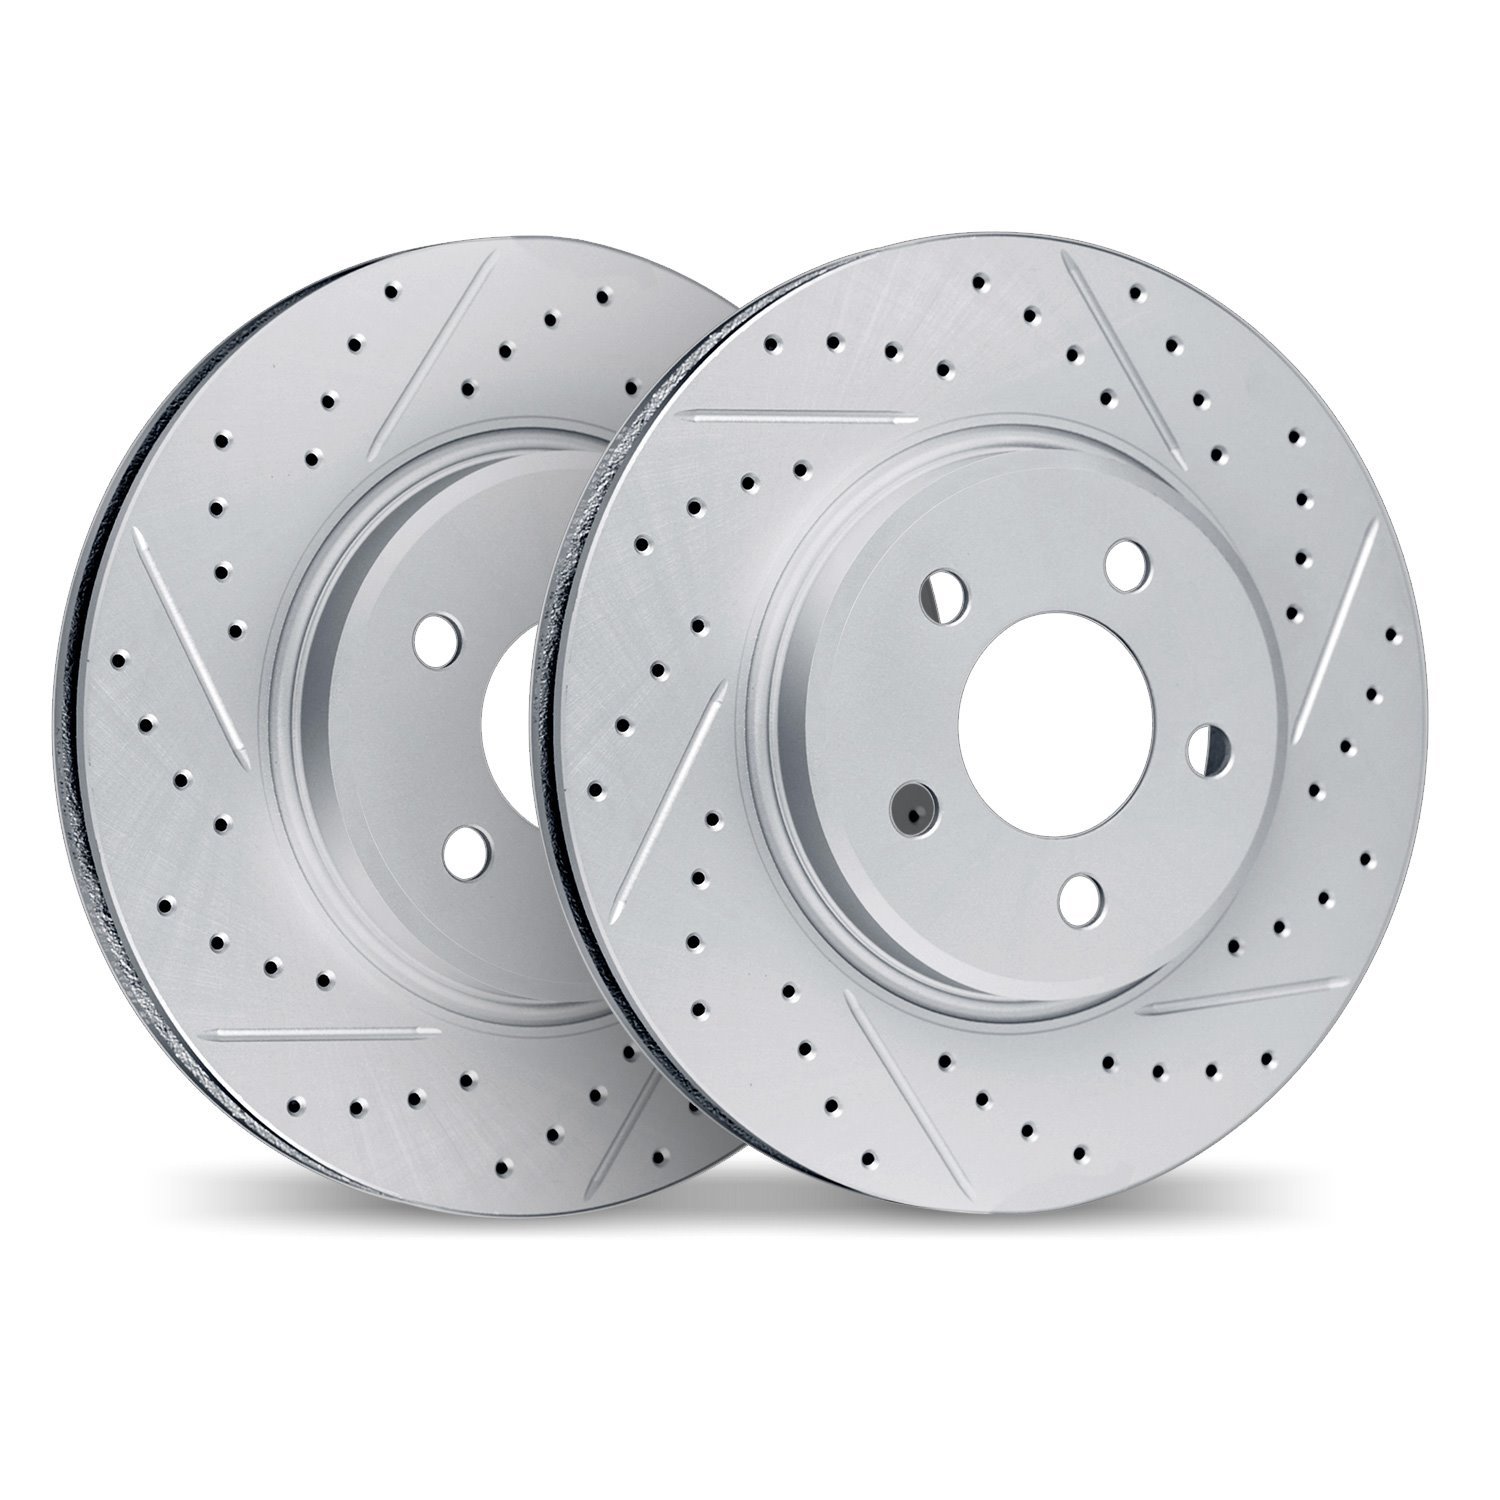 2002-54091 Geoperformance Drilled/Slotted Brake Rotors, 1982-1987 Ford/Lincoln/Mercury/Mazda, Position: Front